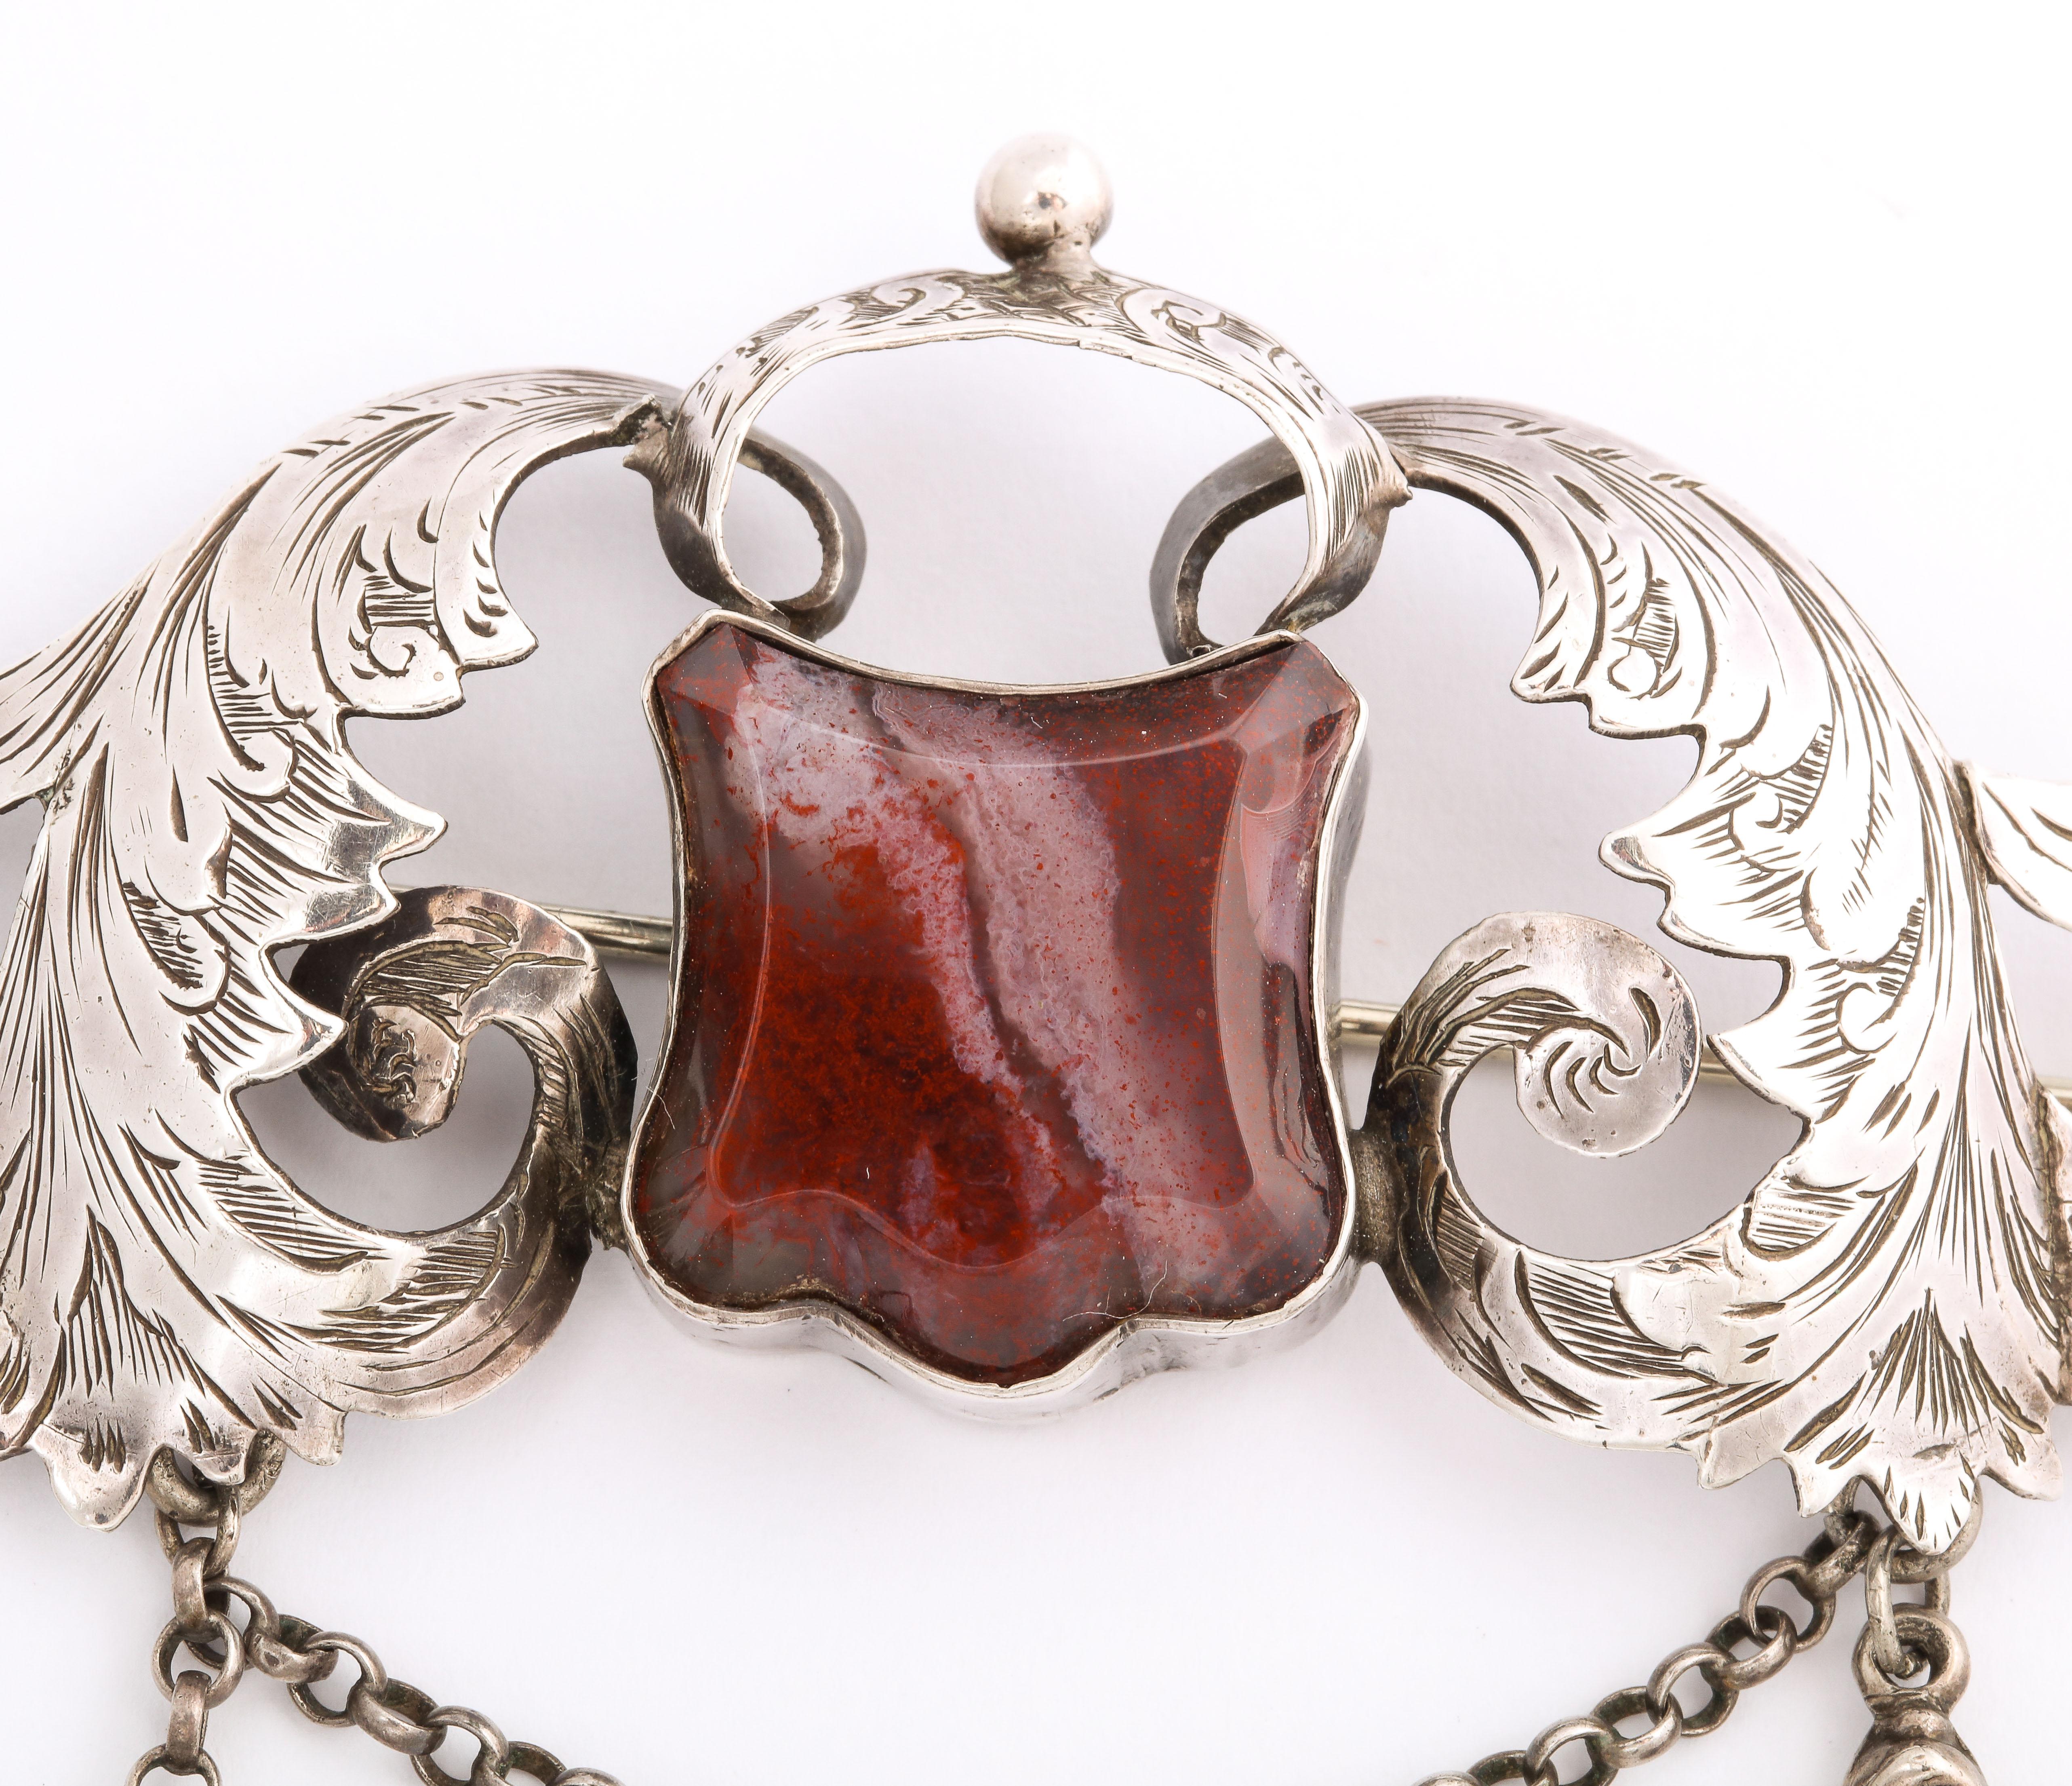 I have not seen another work of art like this large Hilliard and Thomason scrolling, agate crested Scottish brooch. It is a rare  brooch made by these well known silversmiths with their telltale link and drop chain and slide clasp. The brooch